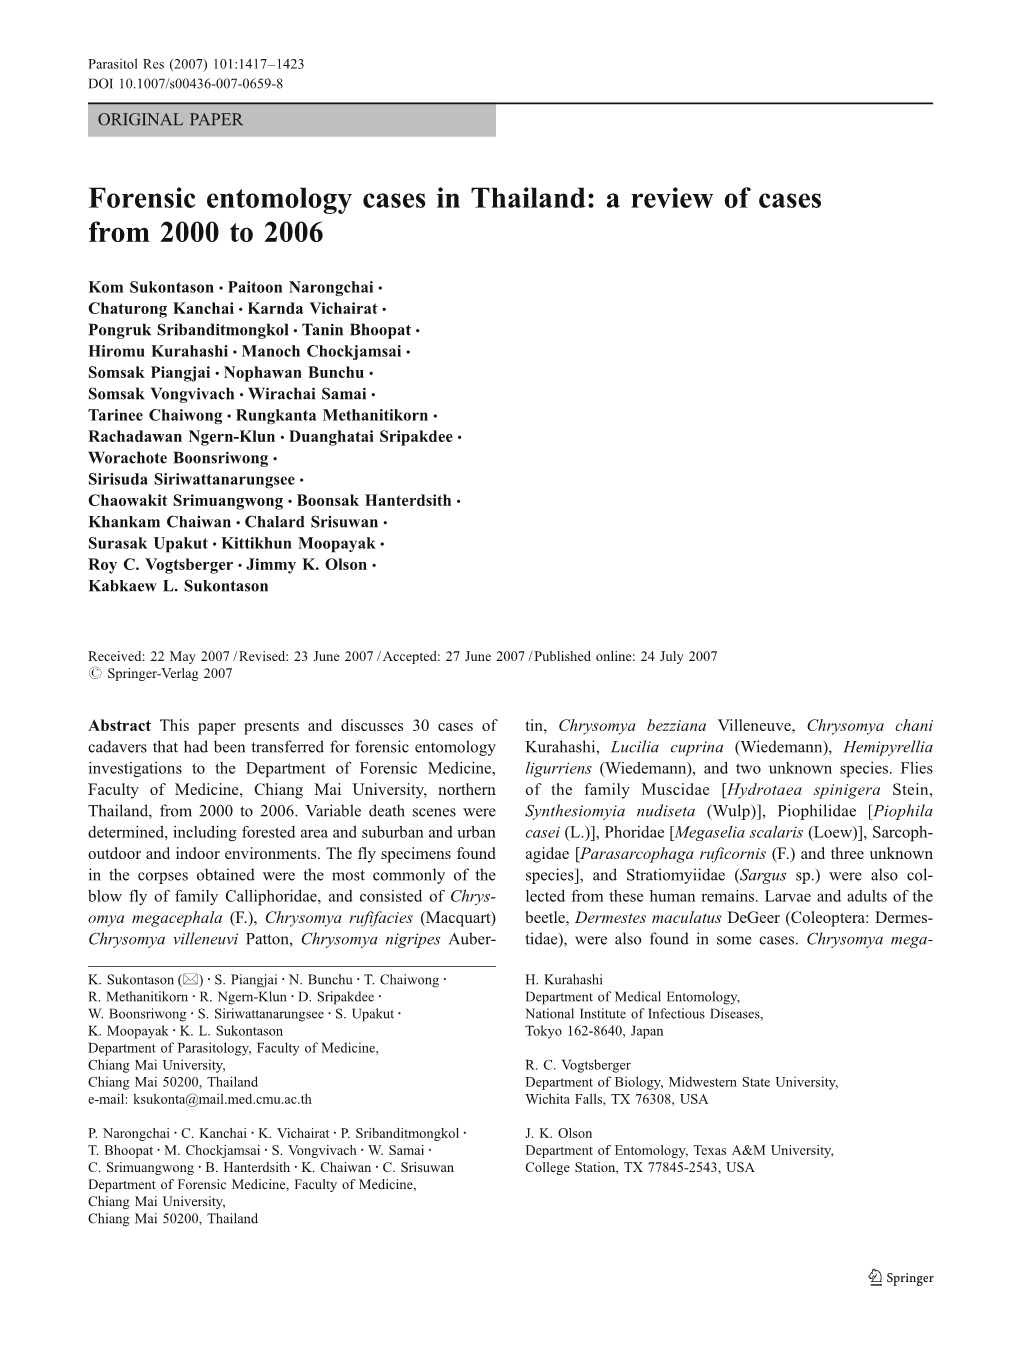 Forensic Entomology Cases in Thailand: a Review of Cases from 2000 to 2006